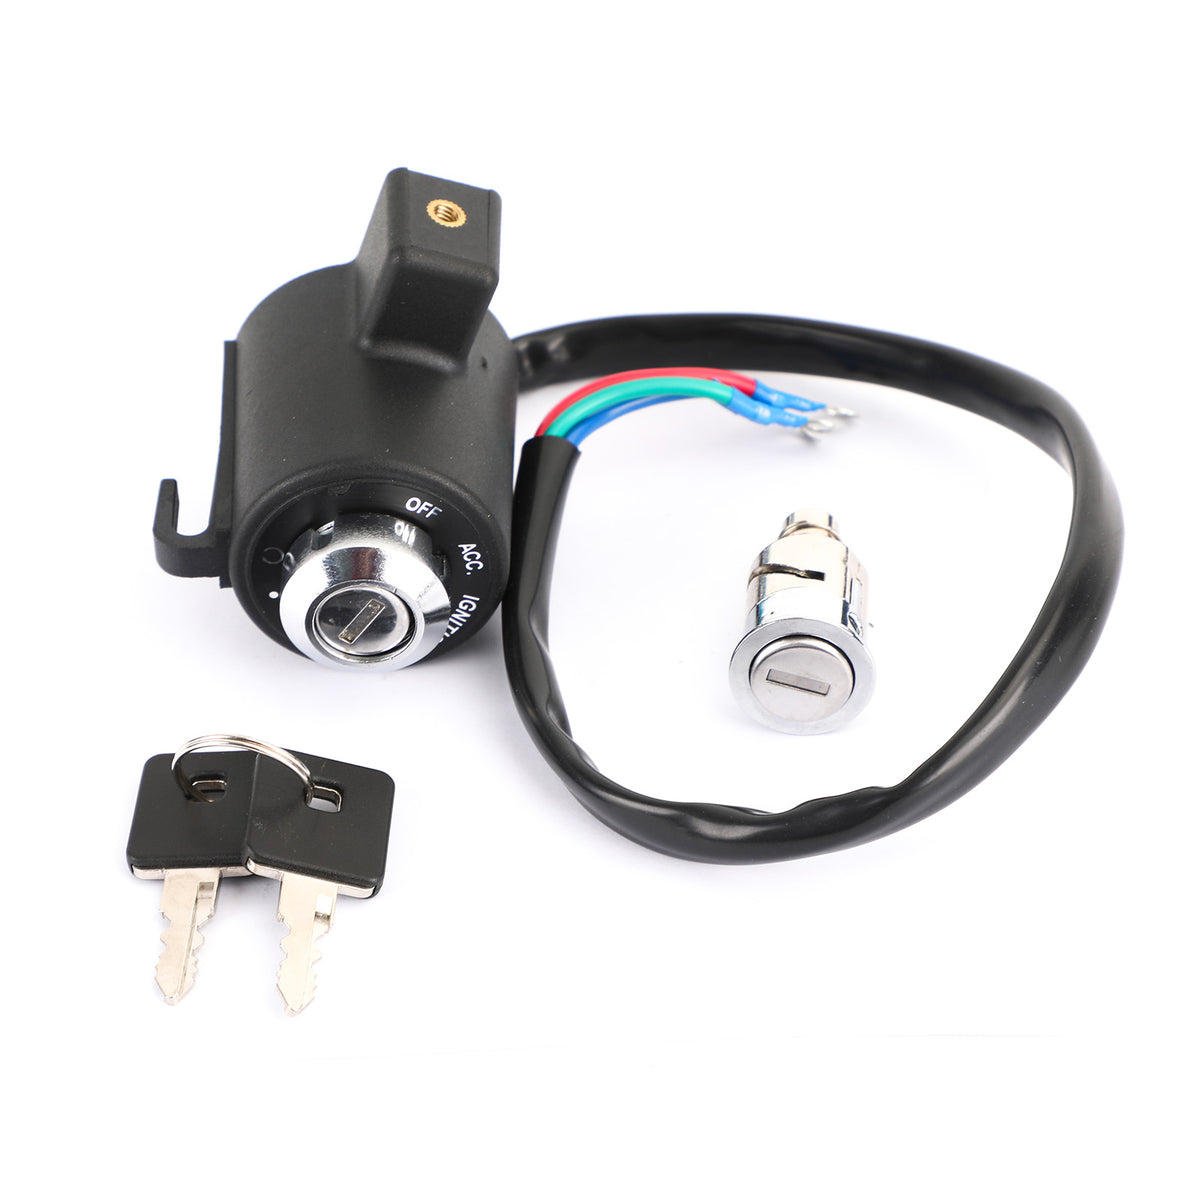 Ignition Key Switch Tail Box Lock Set Fit For XL883R Sportster 883R 2010 XL883N 4LE2 Iron 883 2010-2011 FXRS Low Rider 1991-1992 FXR Super Glide 1991-1994